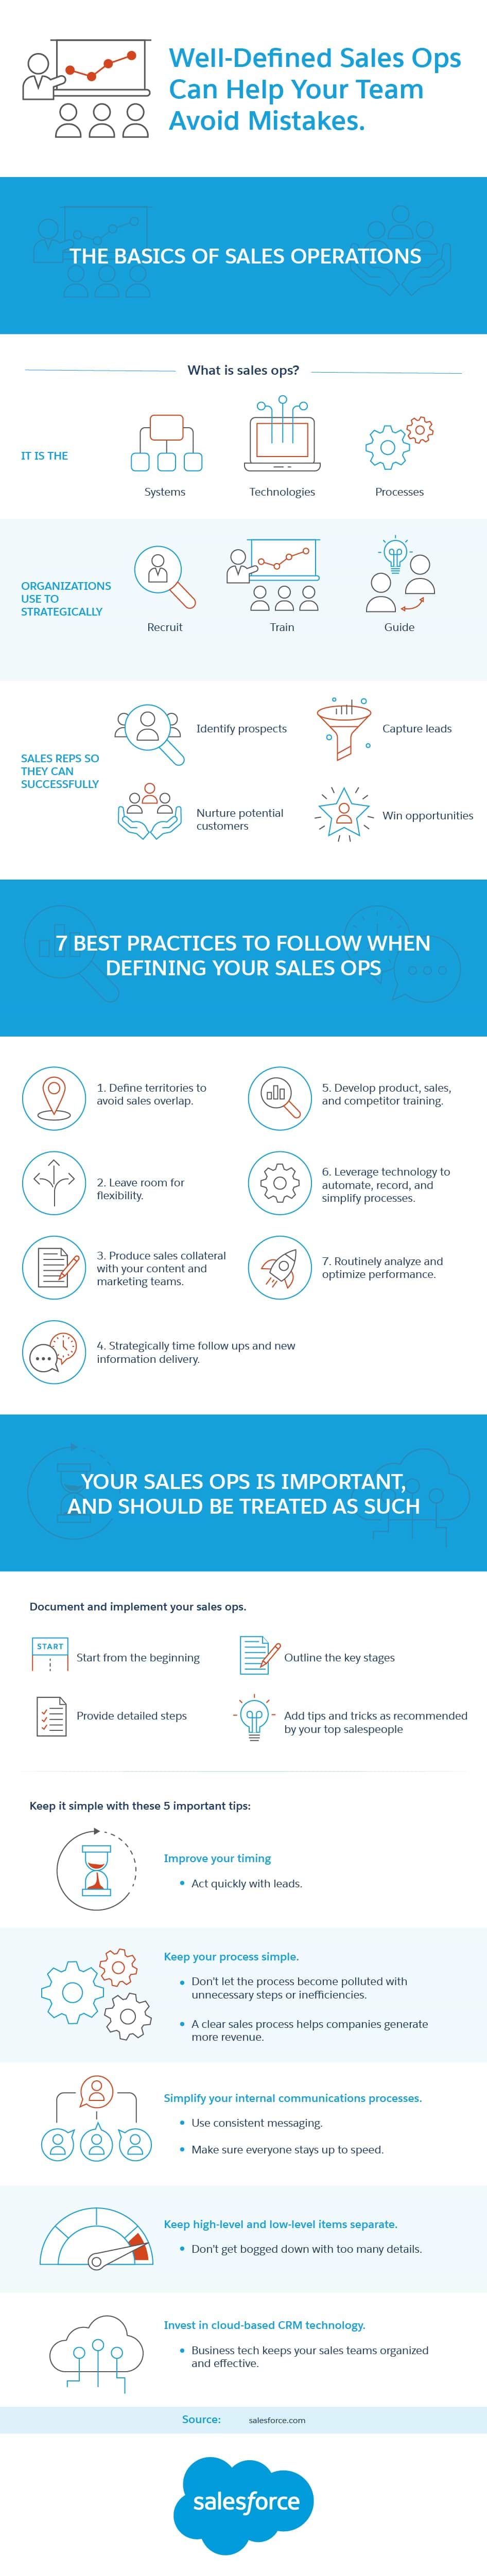 Well-Defined Sales Ops Can Help Your Team Avoid Mistakes